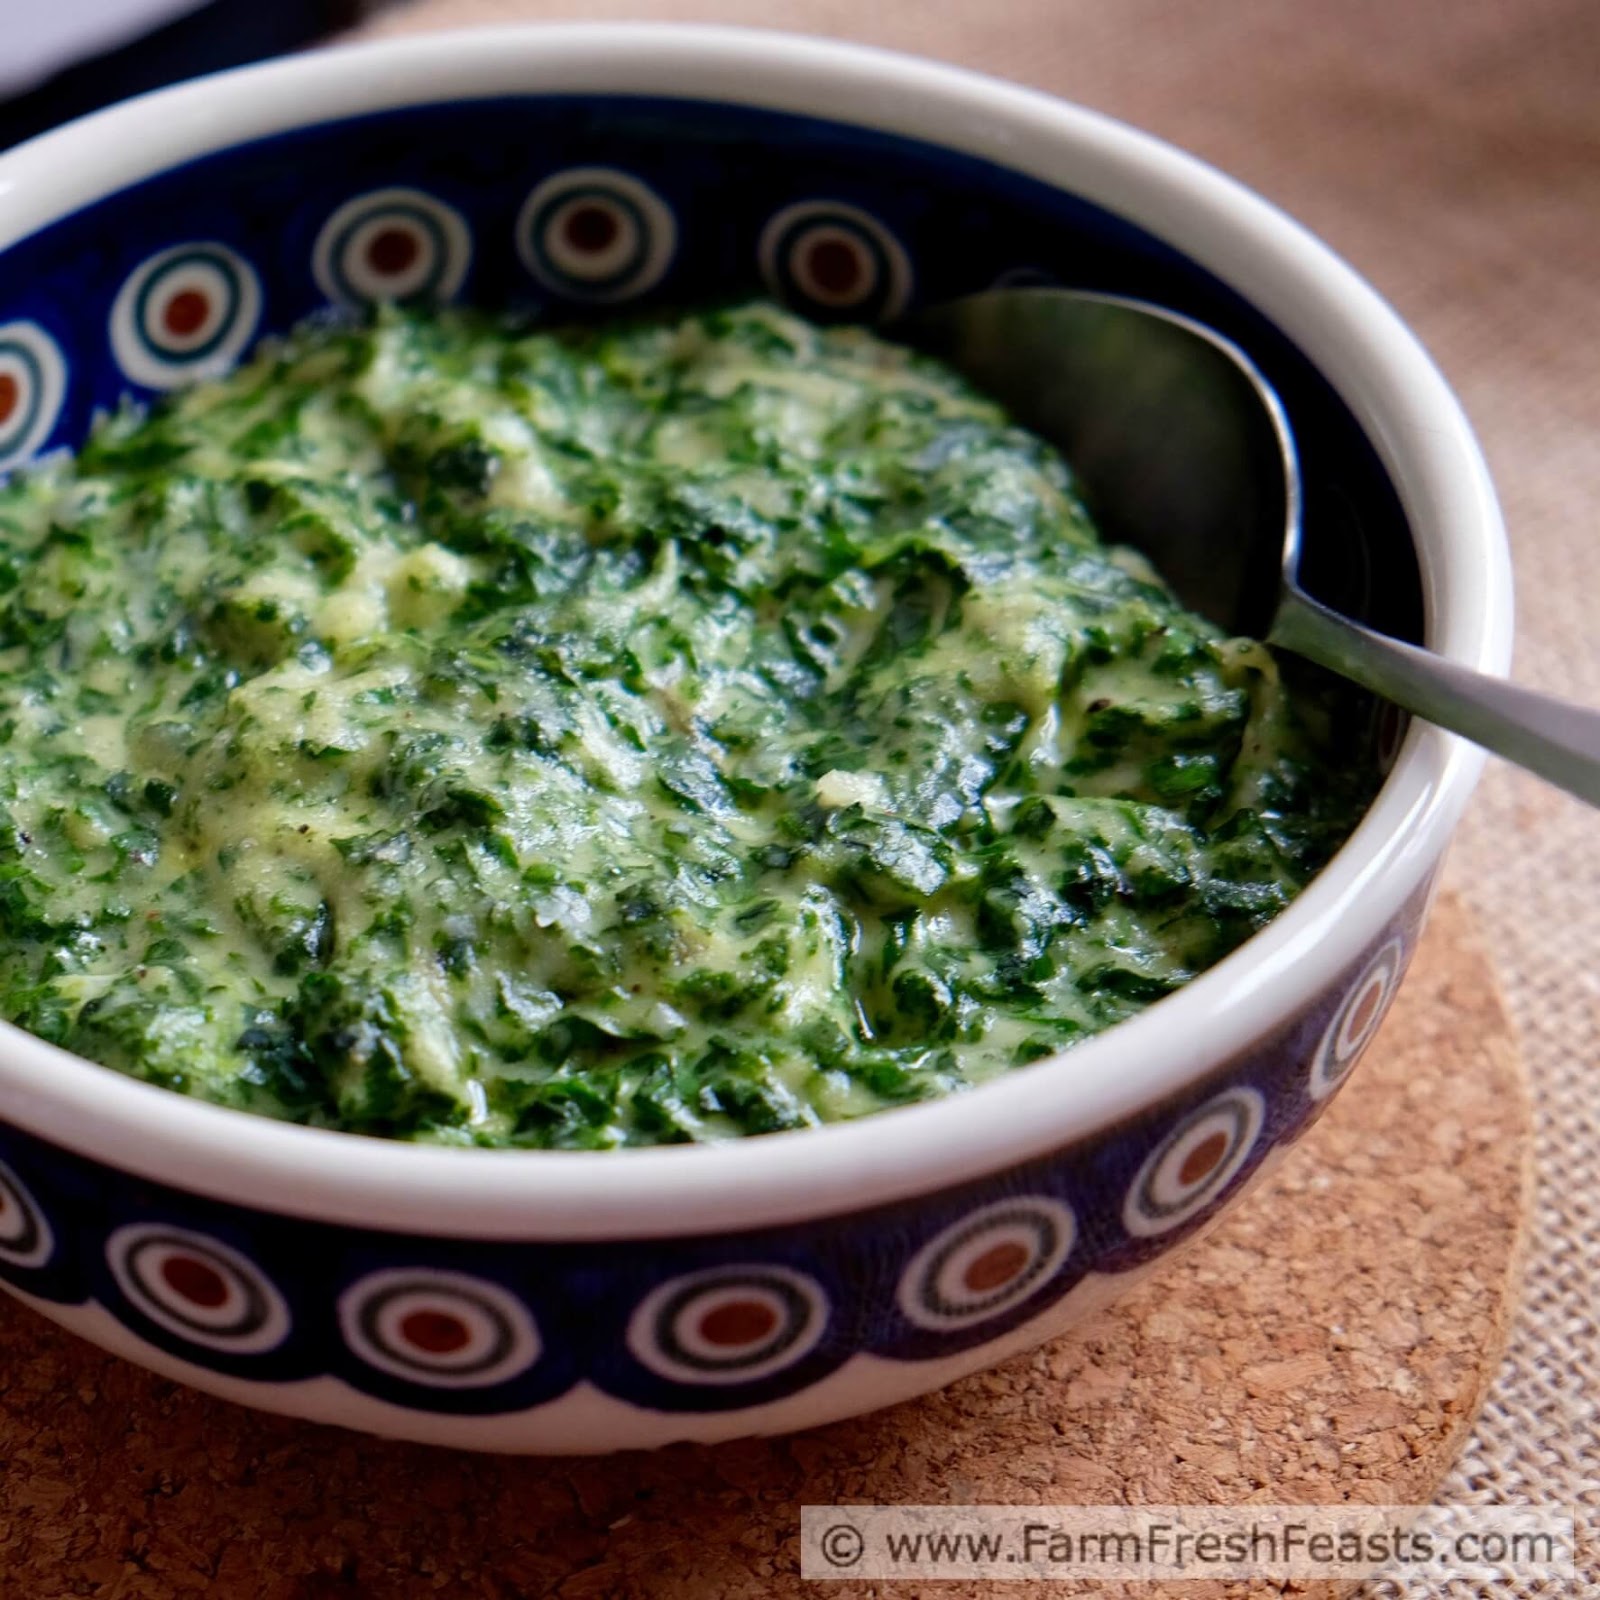 Farm Fresh Feasts: Simple Creamed Spinach from Scratch